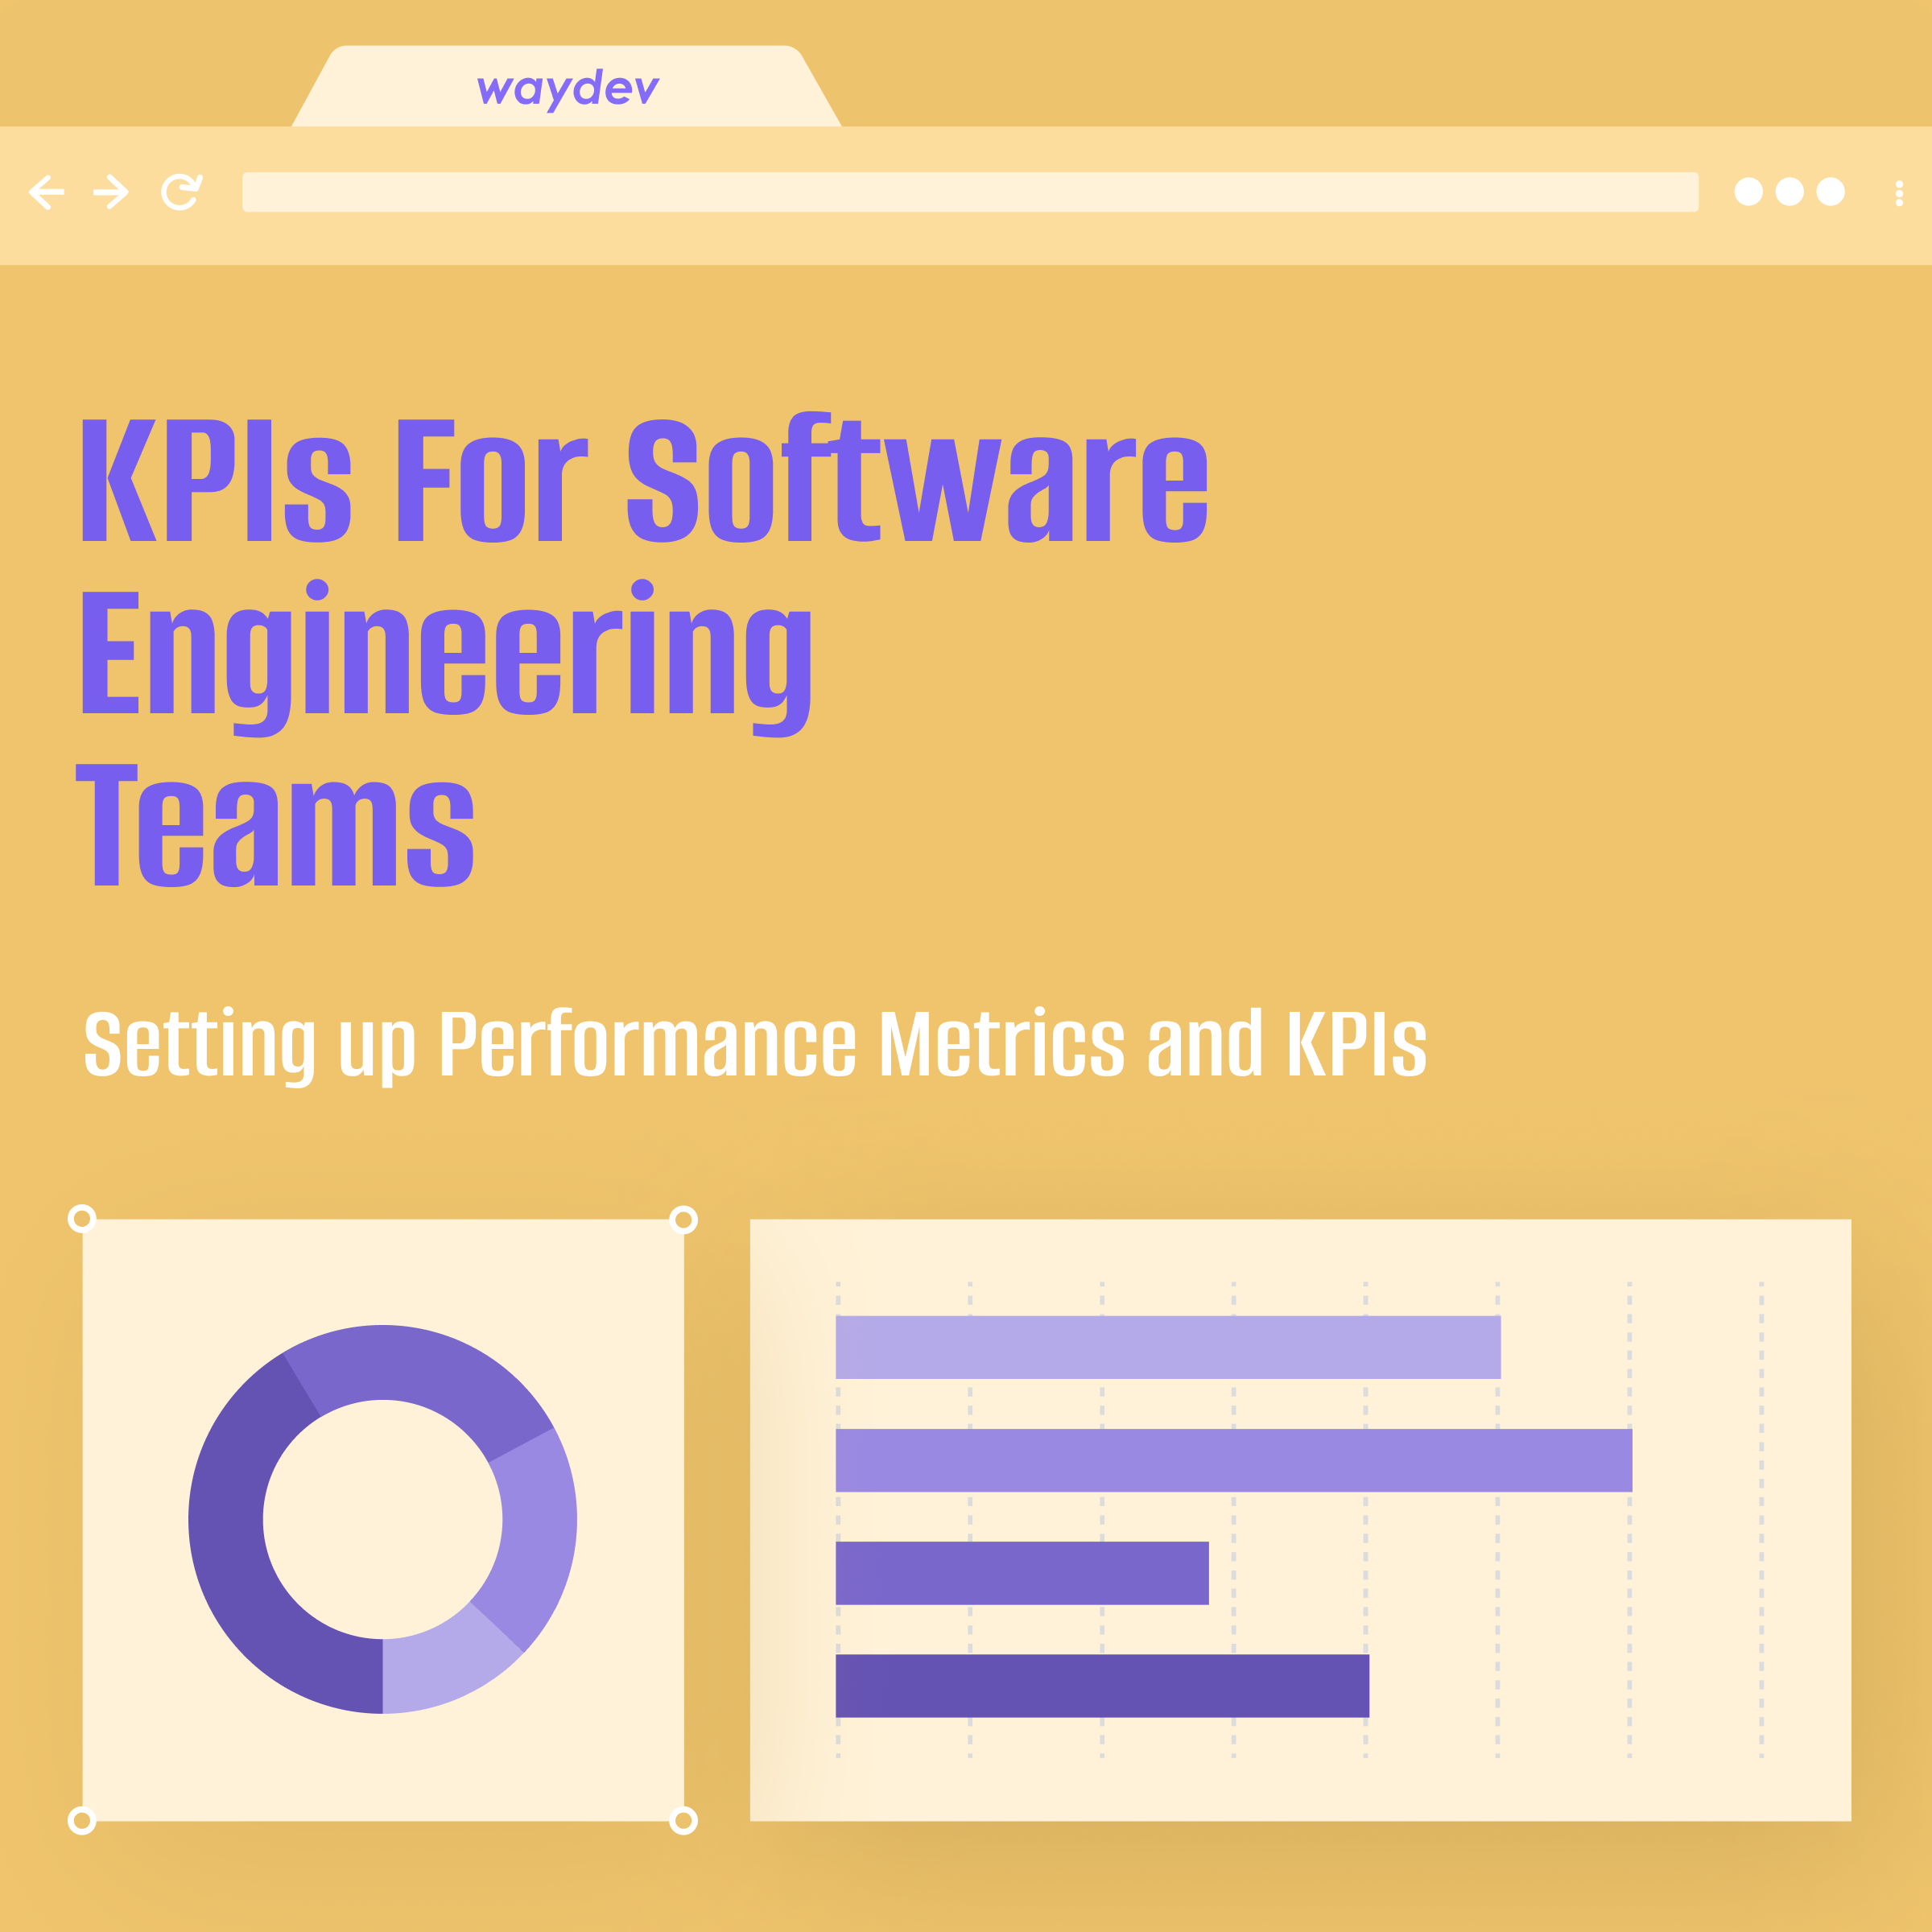 KPIs for Software Engineering Teams